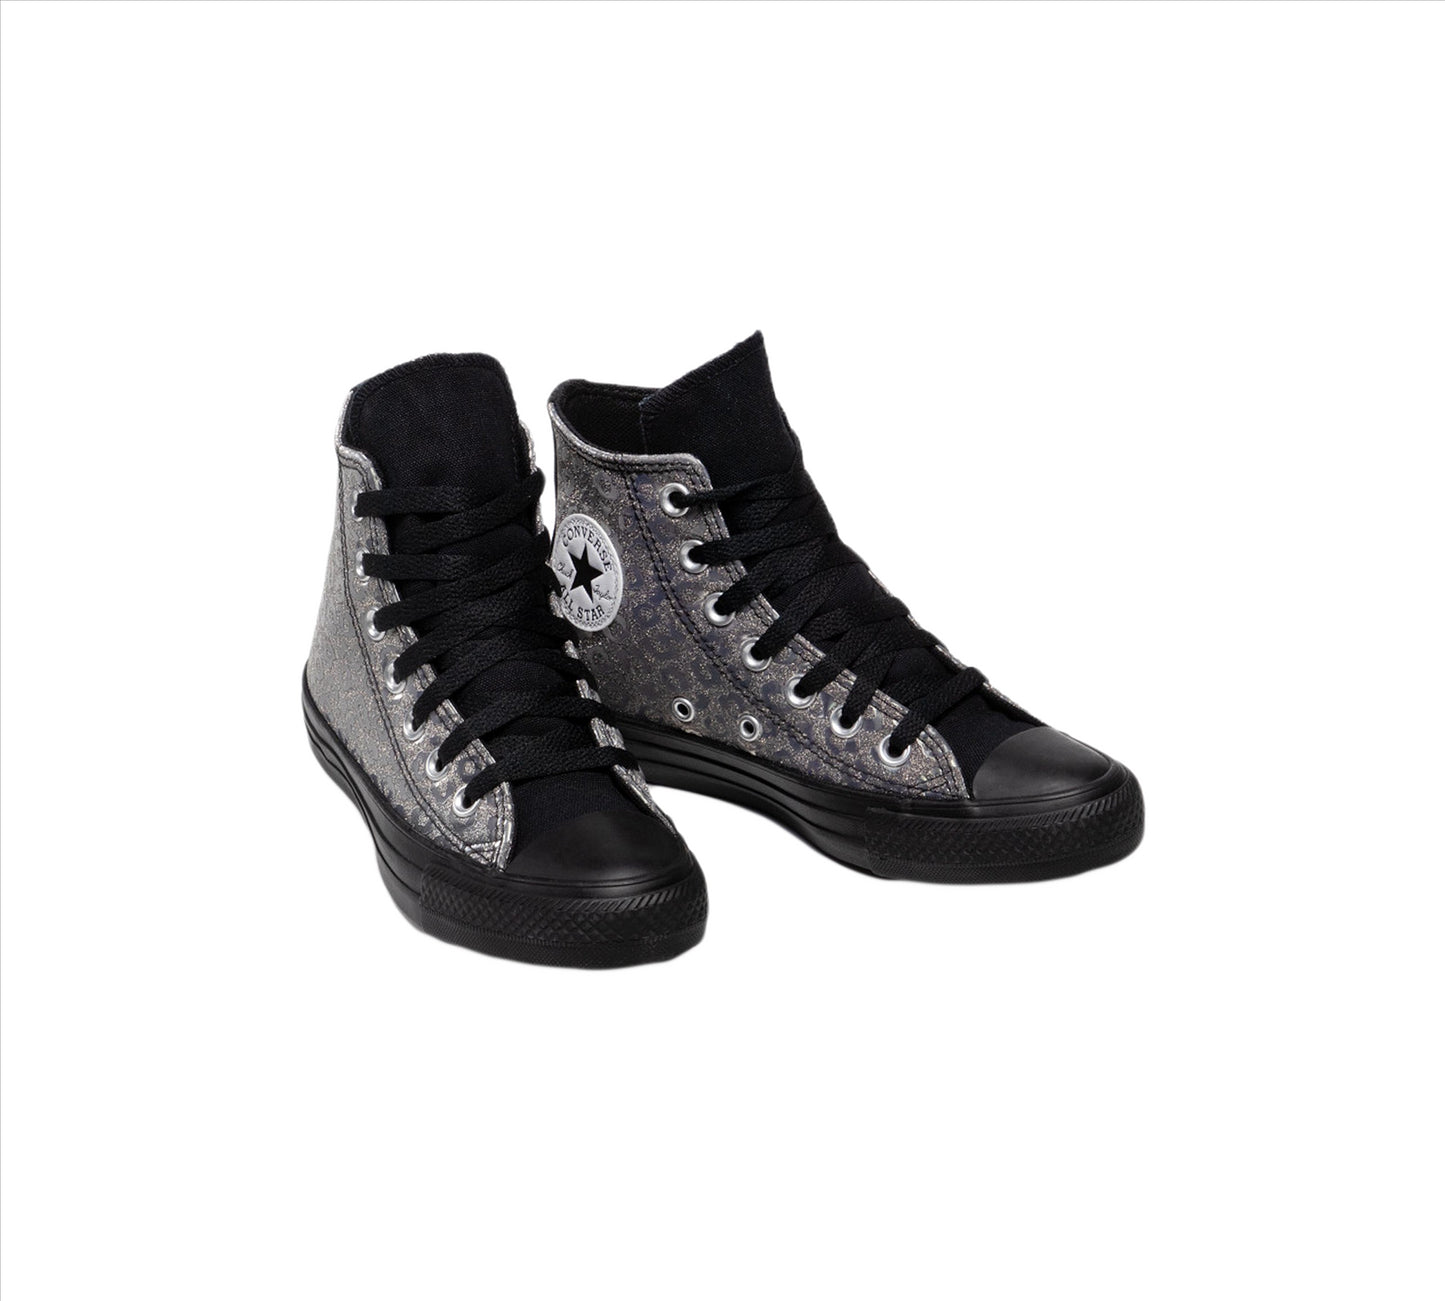 Converse Women's Authentic Glam Chuck Taylor All Star Shoes